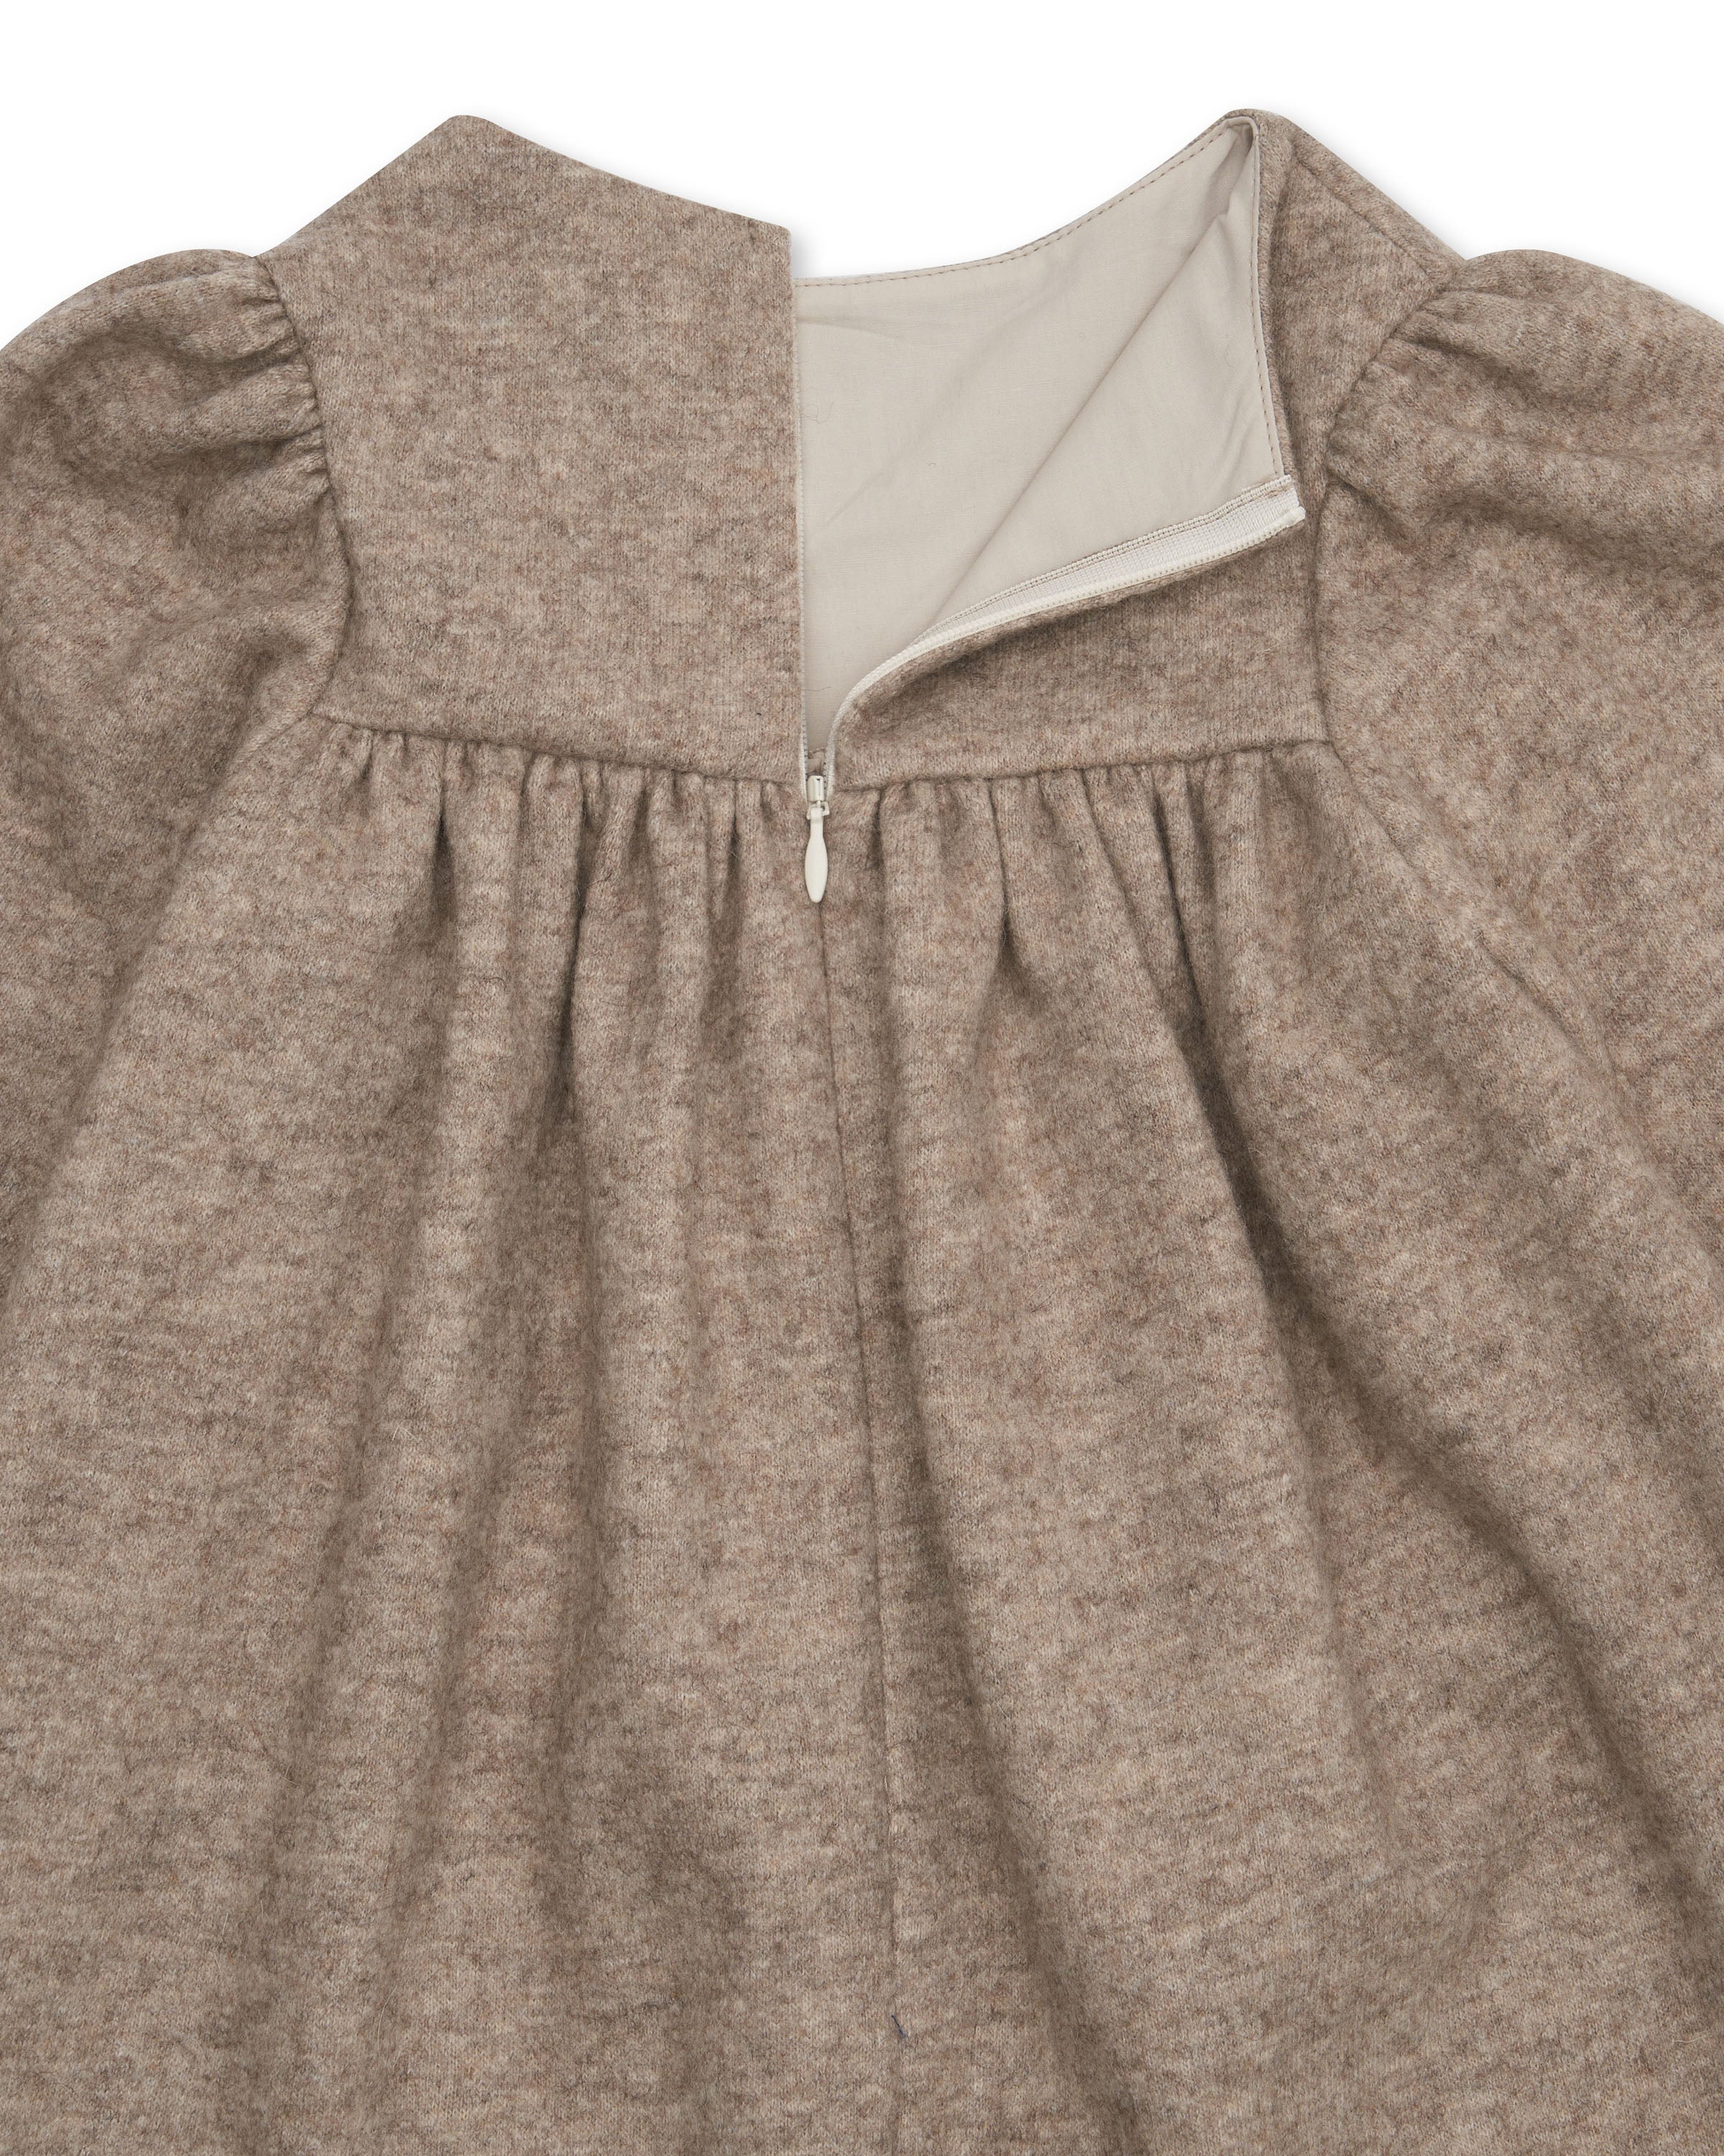 Girls' Designer Dress, Oatmeal, long sleeve, mid length, ages 1 to 6.